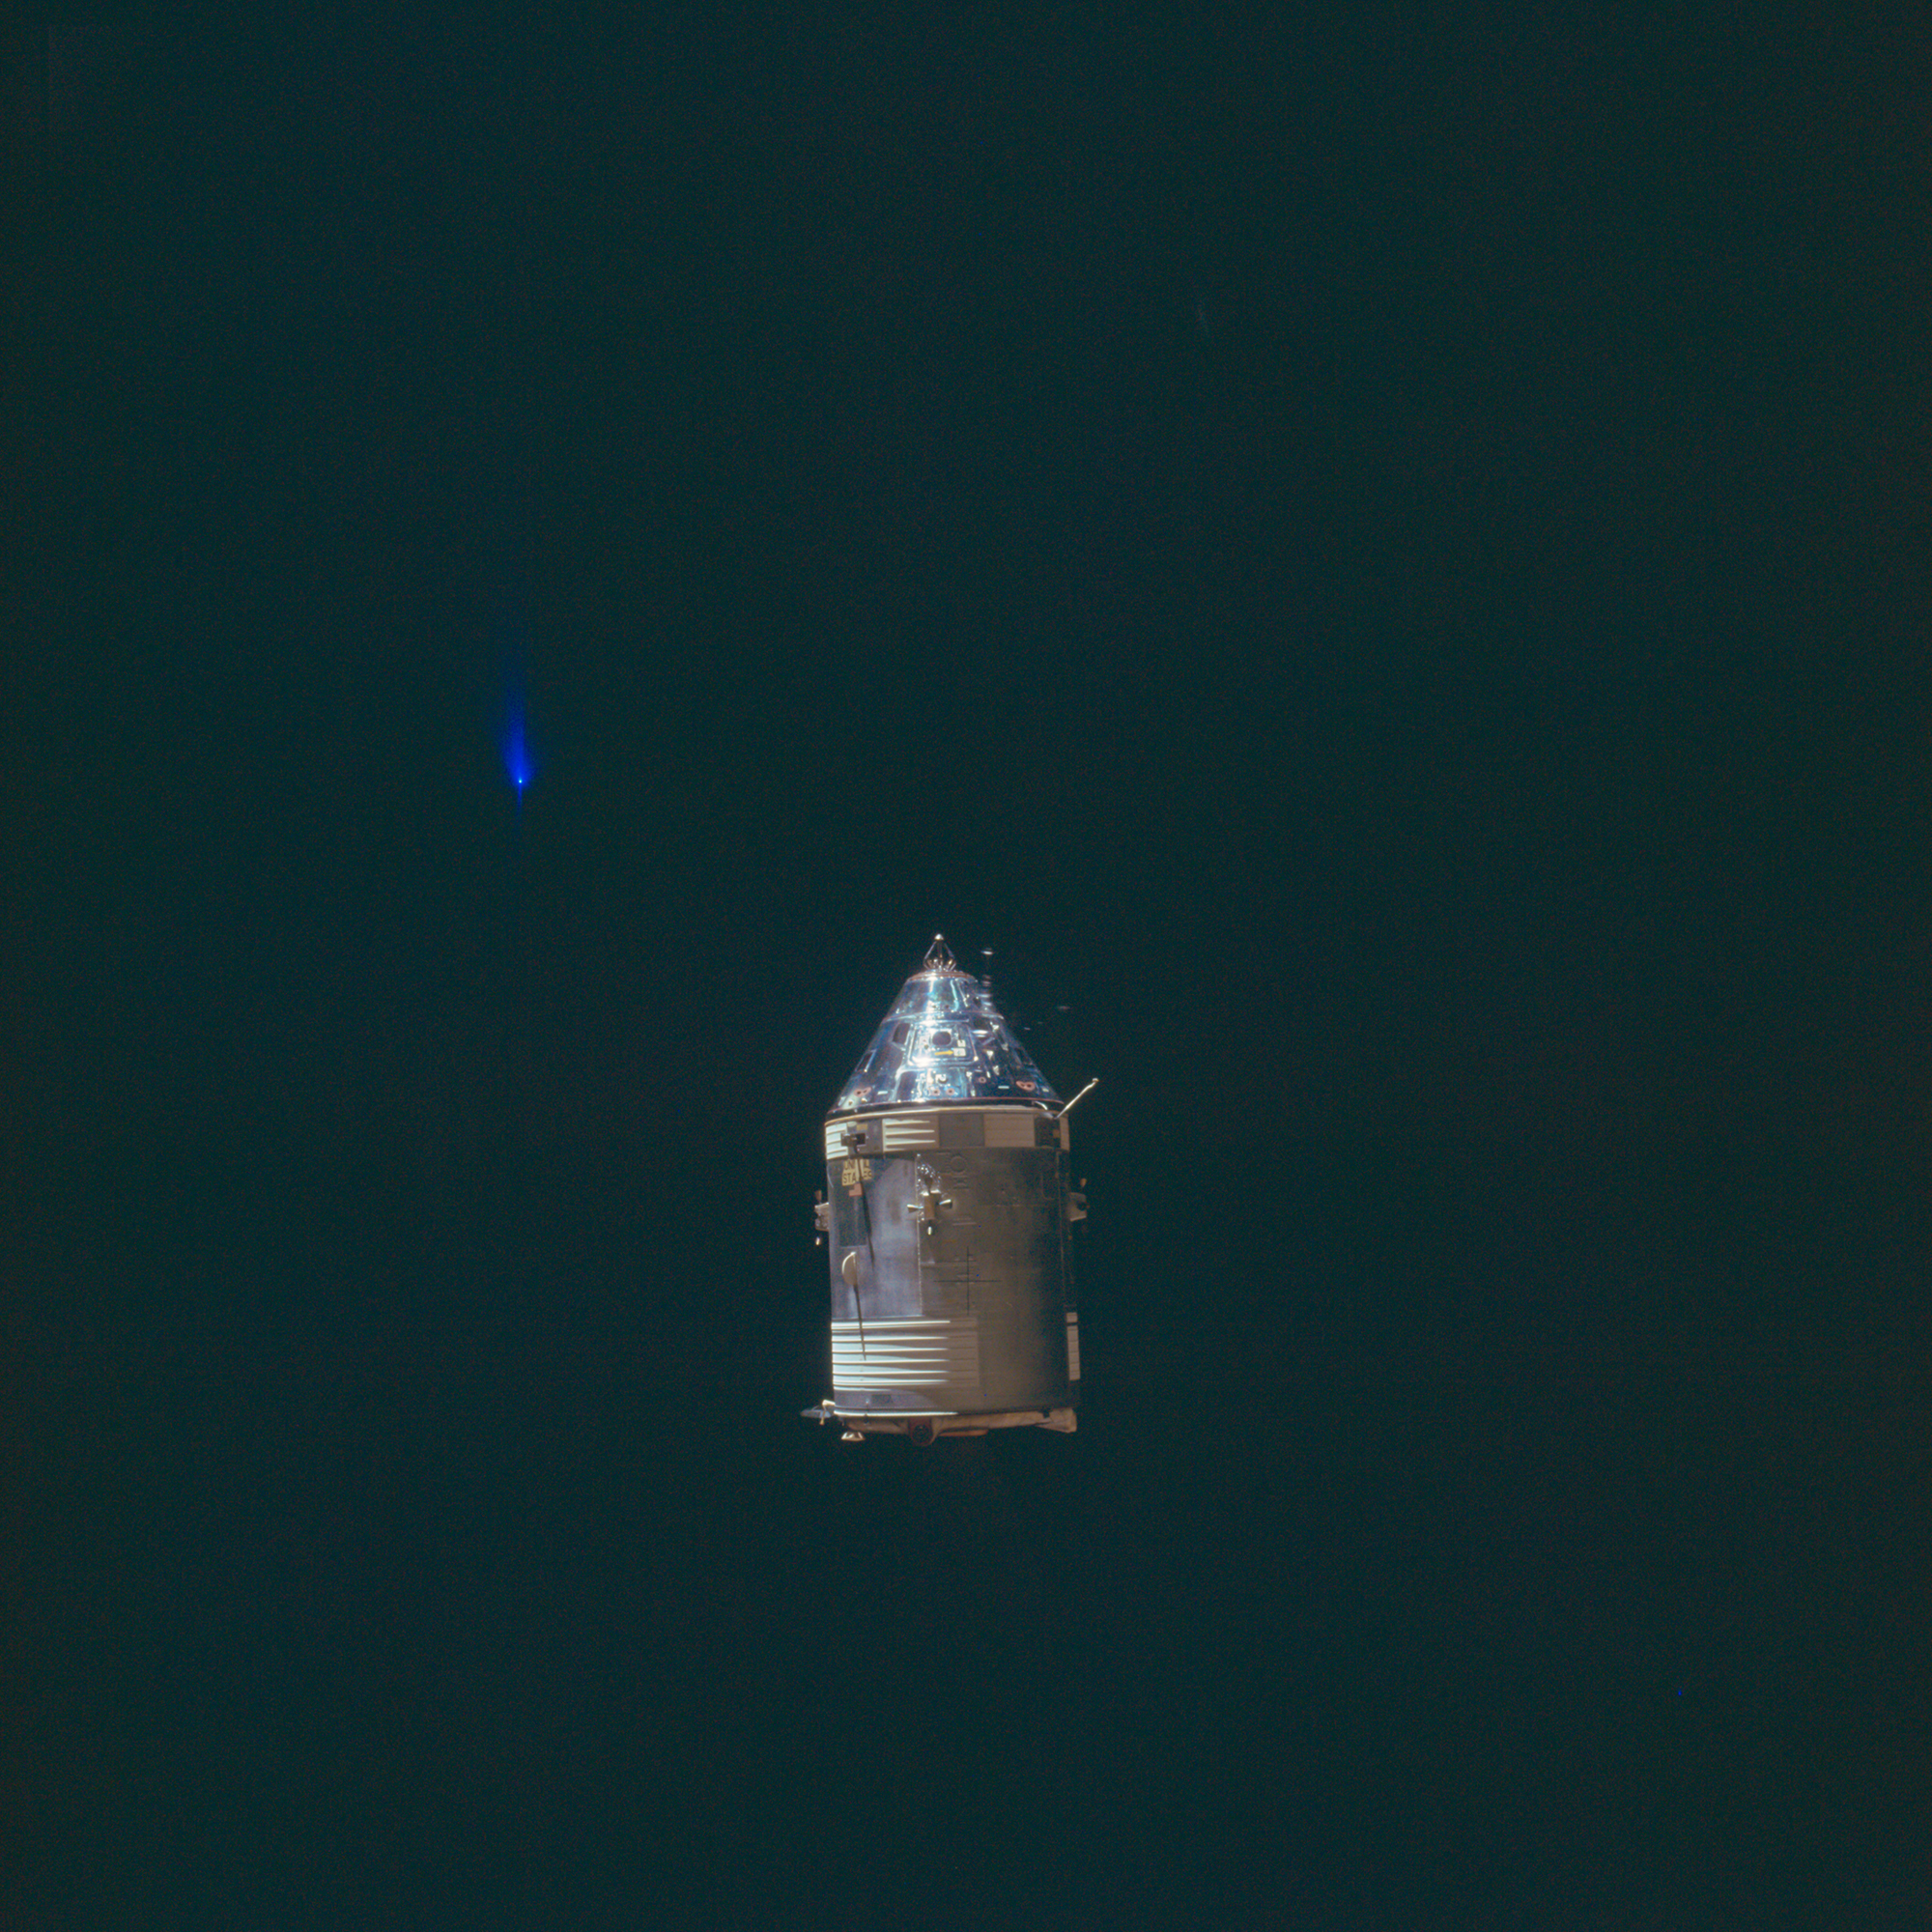 apollo-14-view-of-the-comman-service-module-from-the-lunar-module-during-rendezvous.jpg